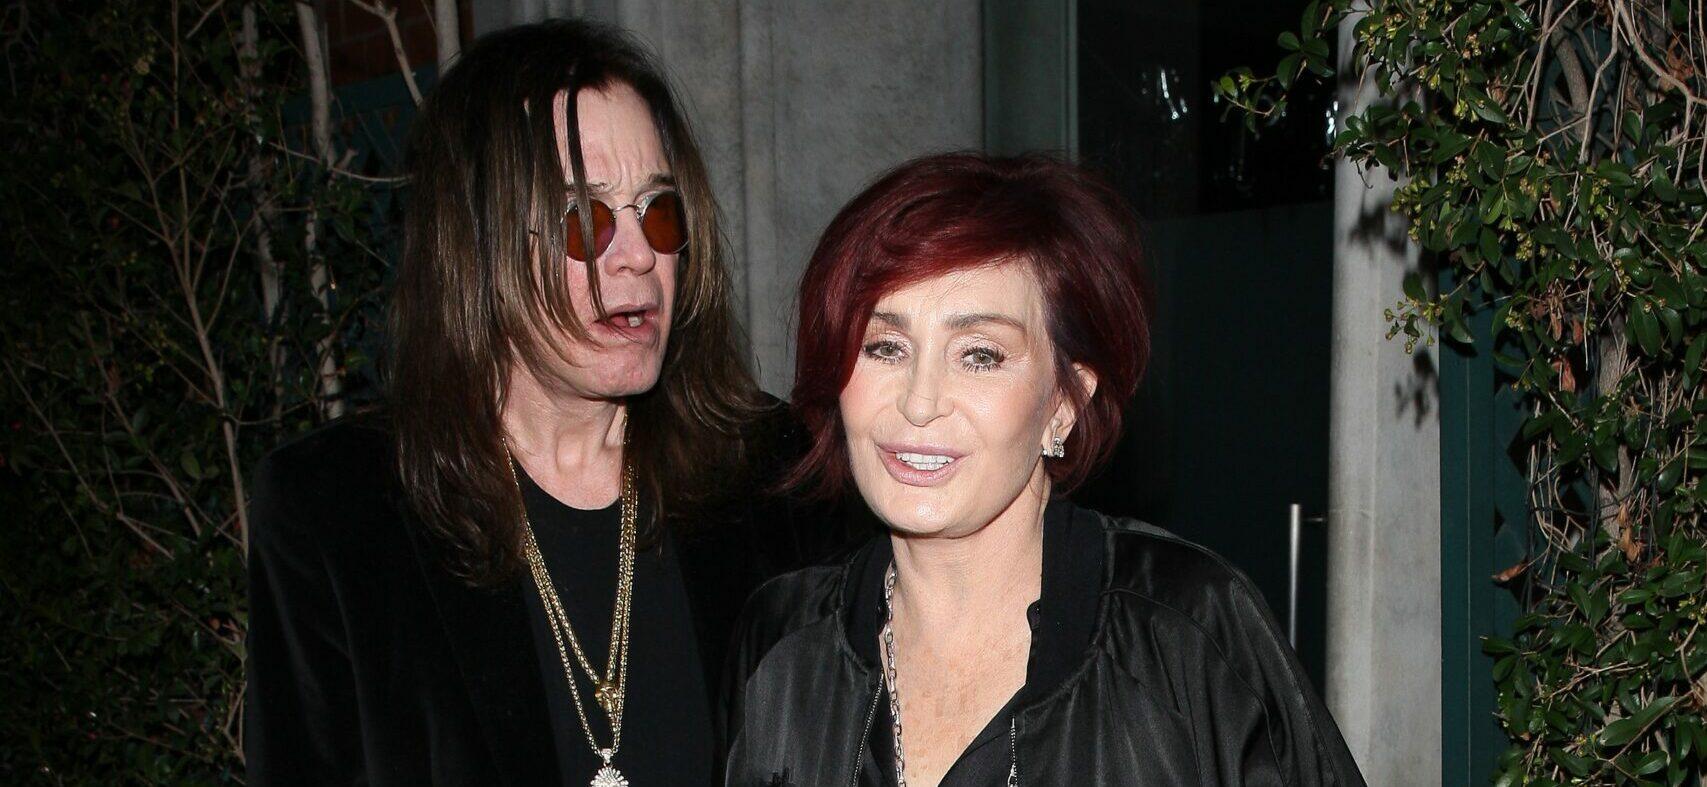 Ozzy Osbourne Says Antidepressants Had Adverse Effect On His Sex Drive Amid Other Health Issues